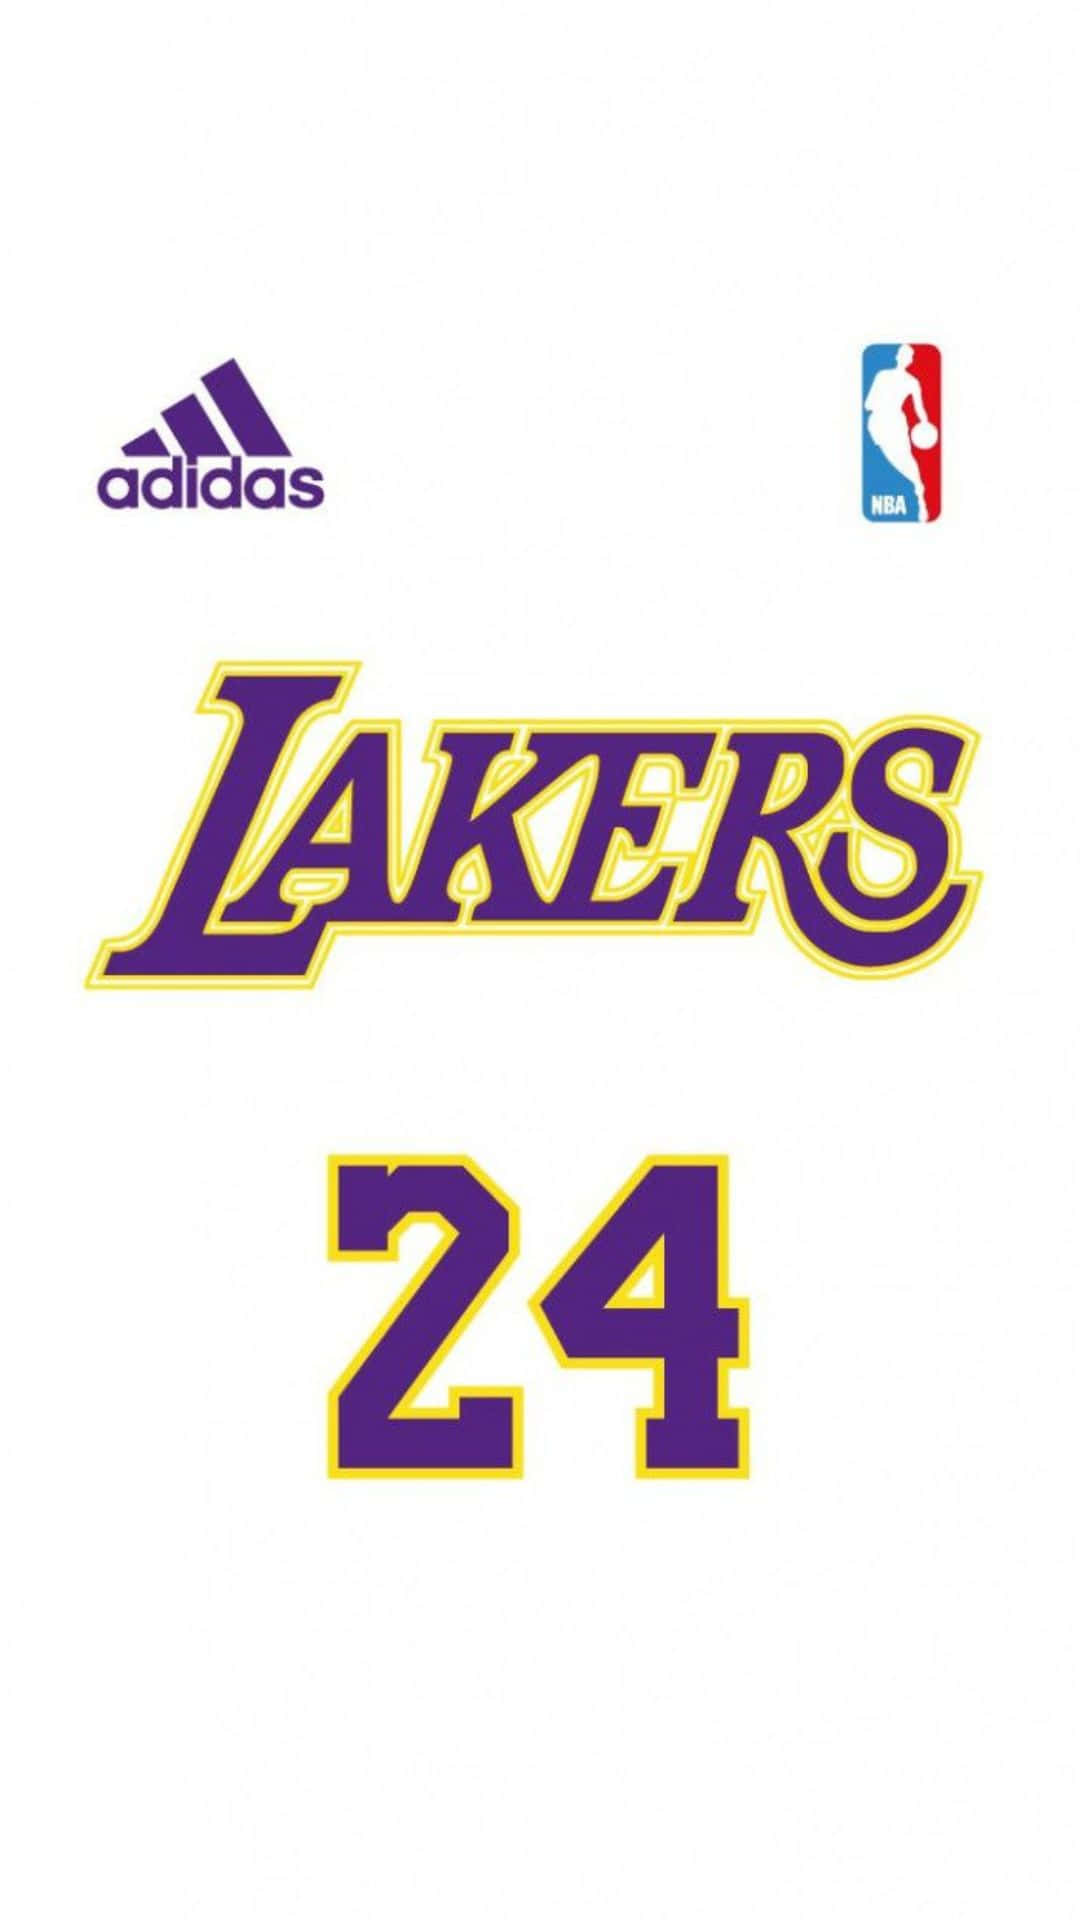 Adidas Lakers Jersey Number24 Wallpaper